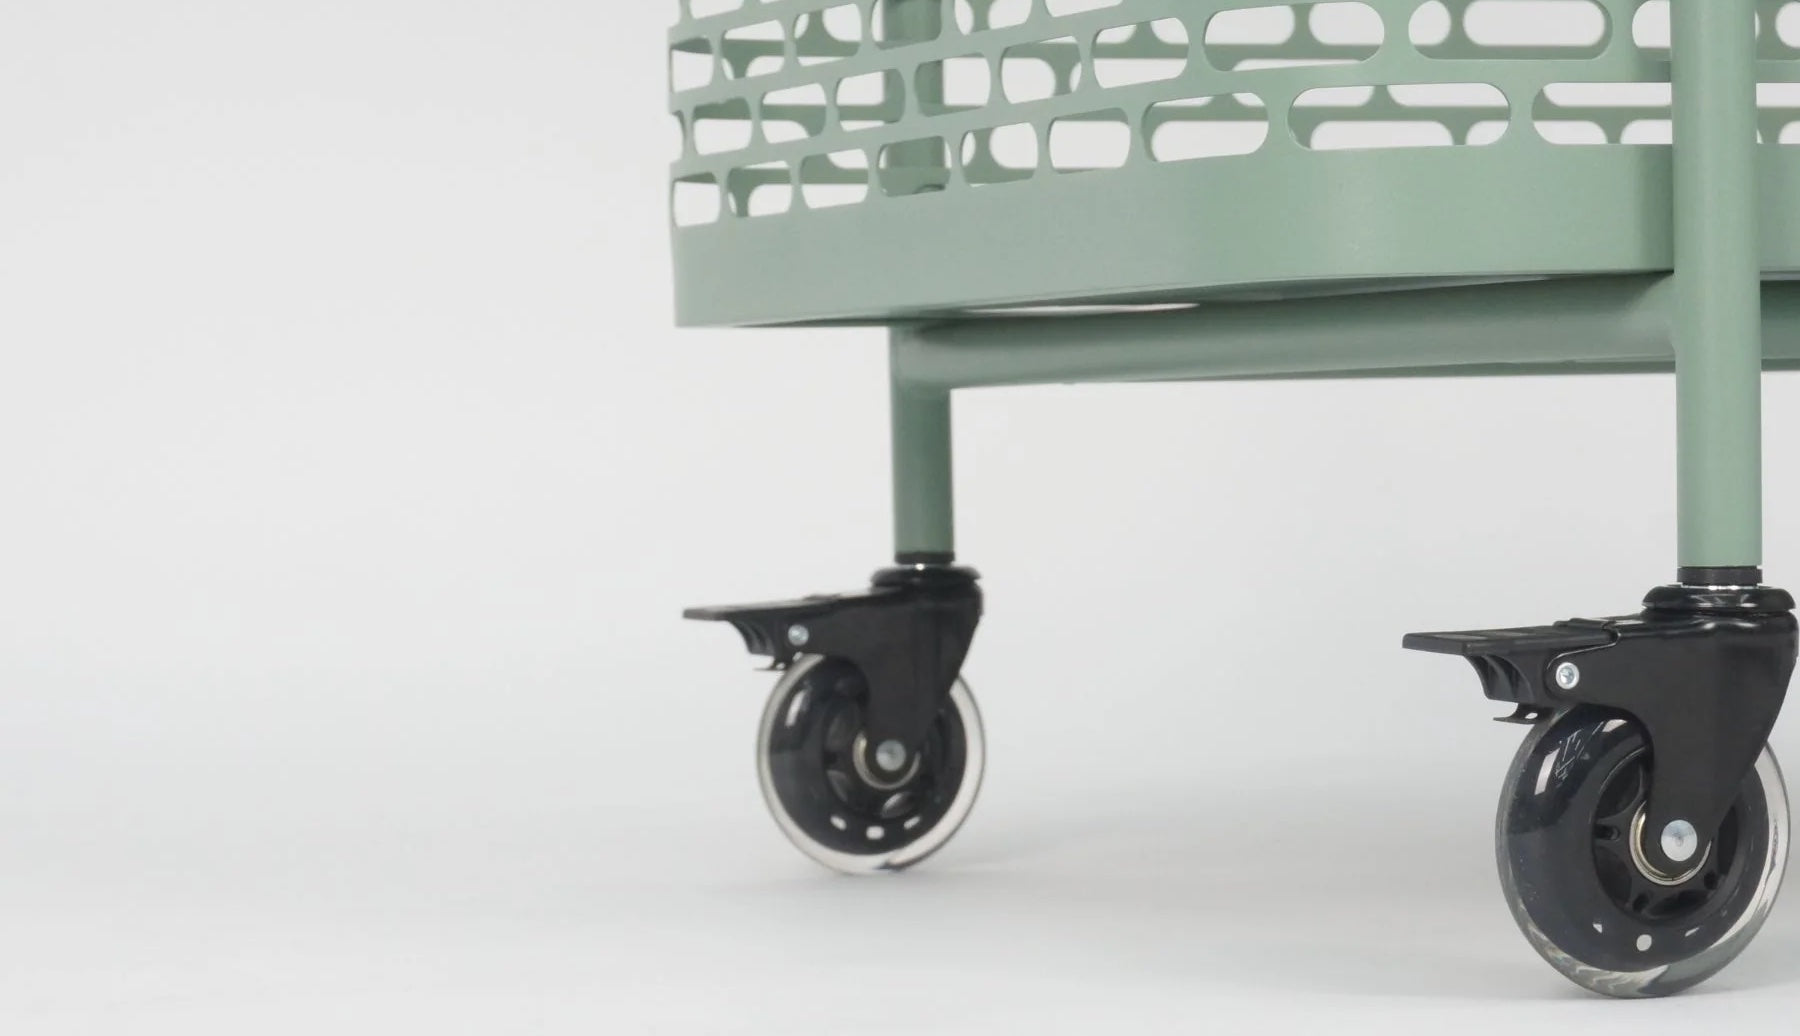 The bottom tray and wheels of a green bar cart